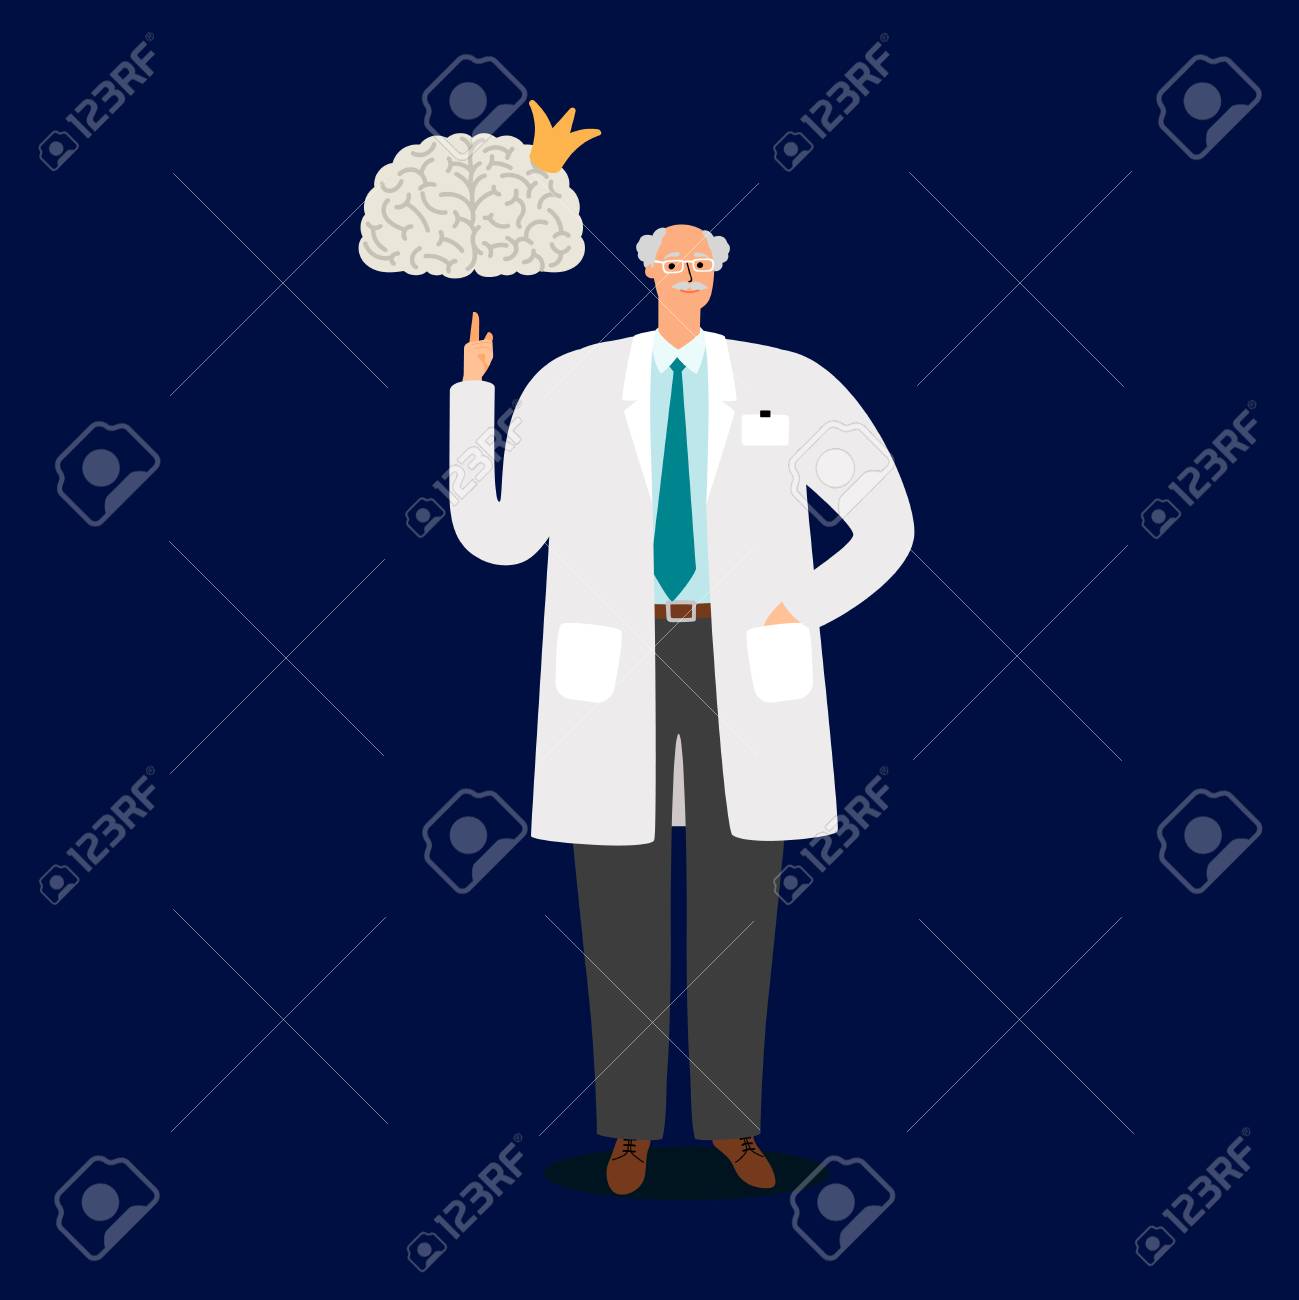 Professor Doctor And Human Brain On Deep Blue Background Vector